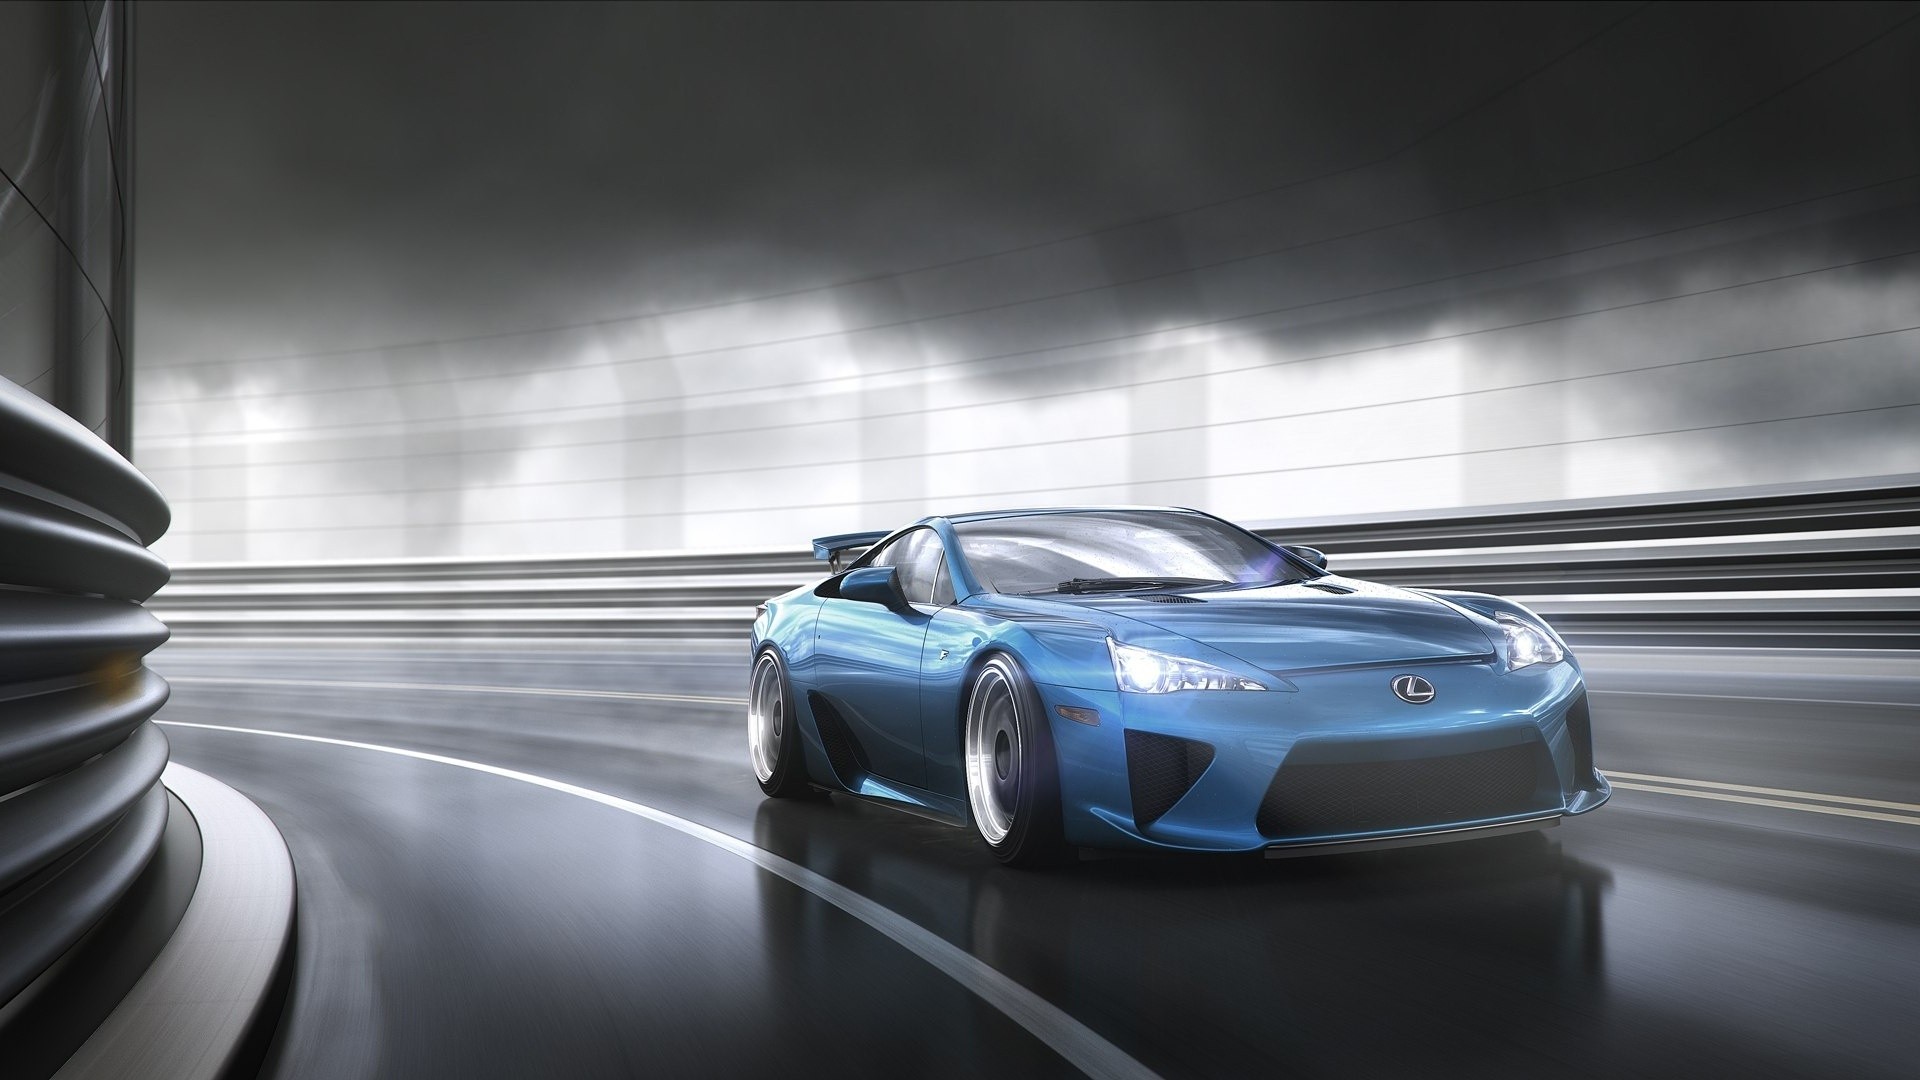 Free Download Lexus Lfa Tuning Roads Tunnel Wallpaper 1920x1080 55864 1920x1080 For Your Desktop Mobile Tablet Explore 48 Lexus Lfa Wallpaper Lexus Wallpapers Desktop Lexus Wallpaper Hd Lexus Logo Wallpaper